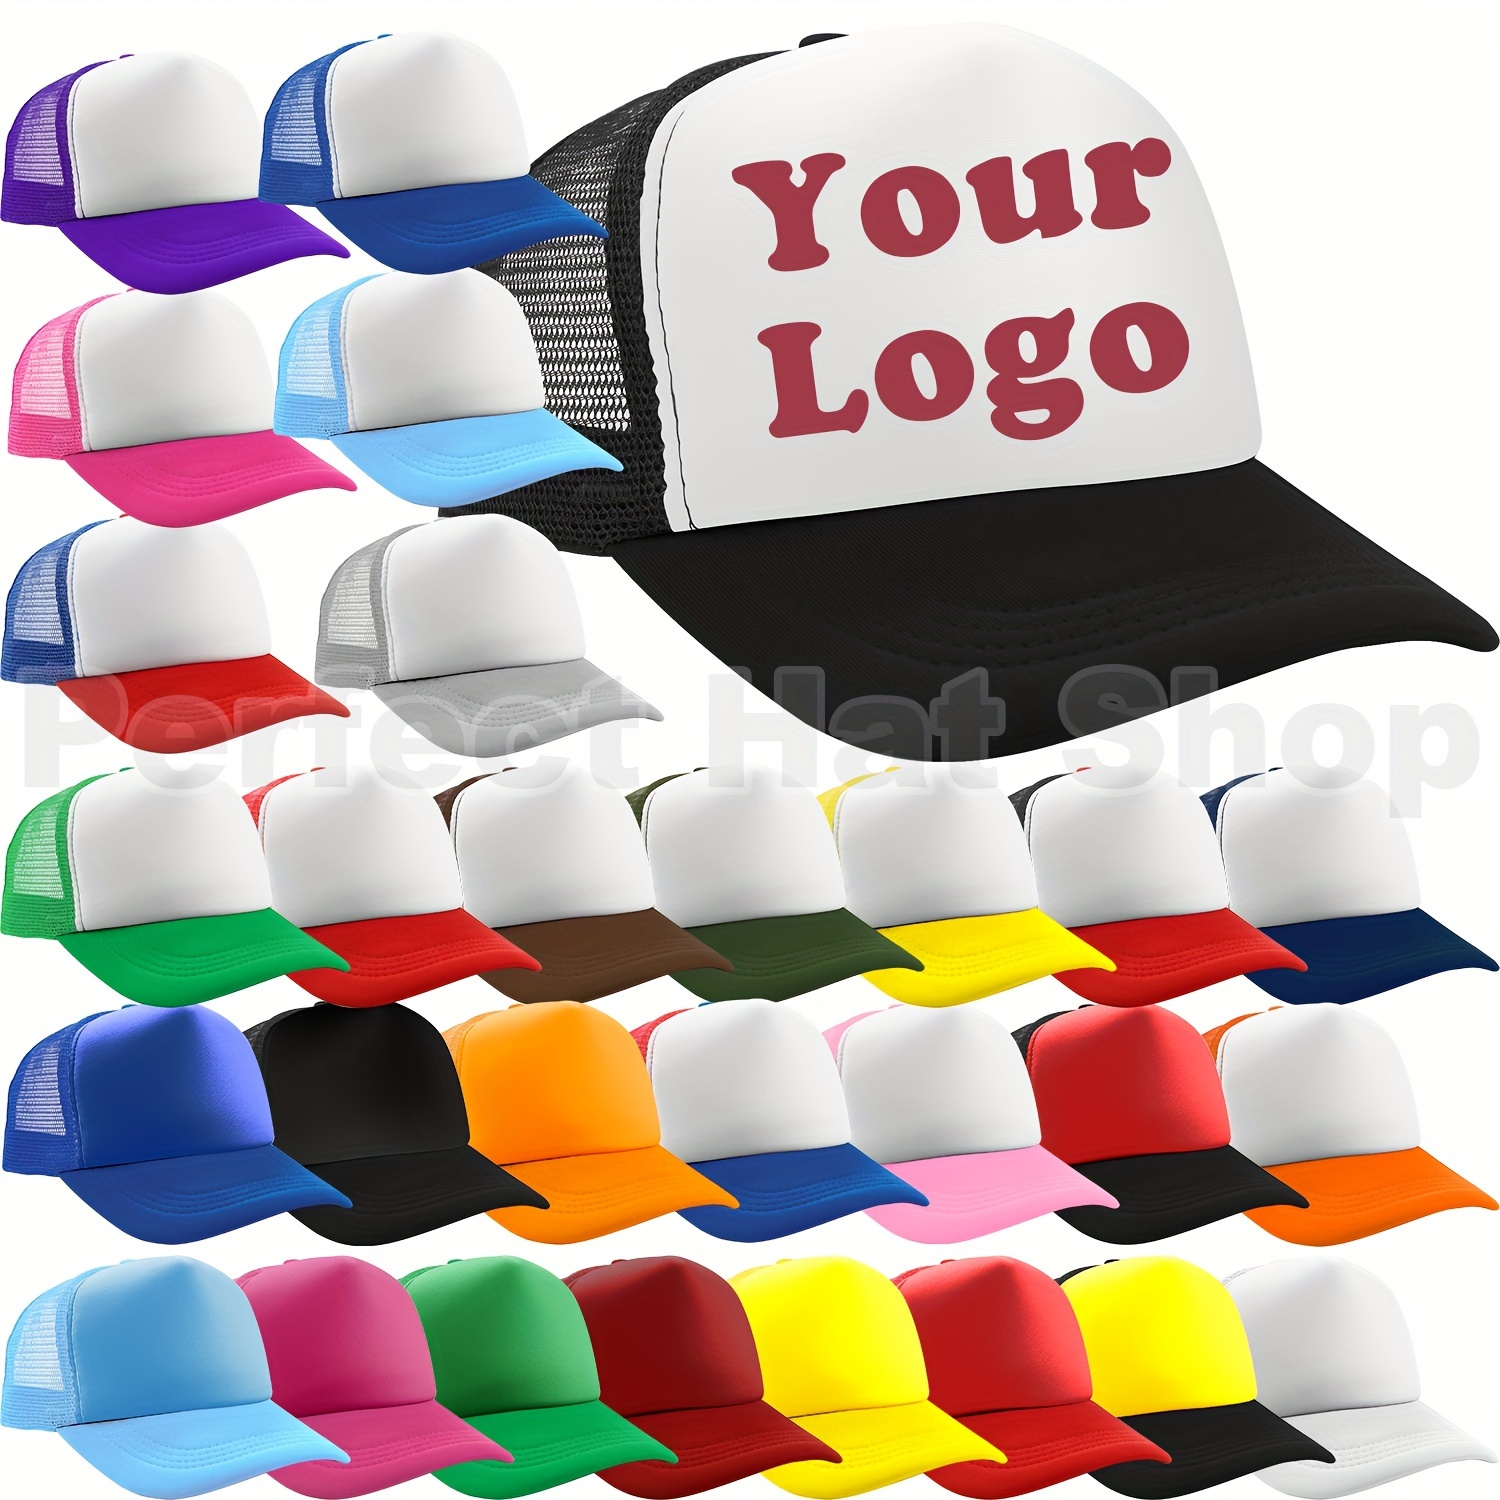 

Custom Personalized Trucker Hat - Adjustable Mesh Baseball Cap With Your Logo/text, Unique Casual Sunshade Cap, Multi-color Options Available